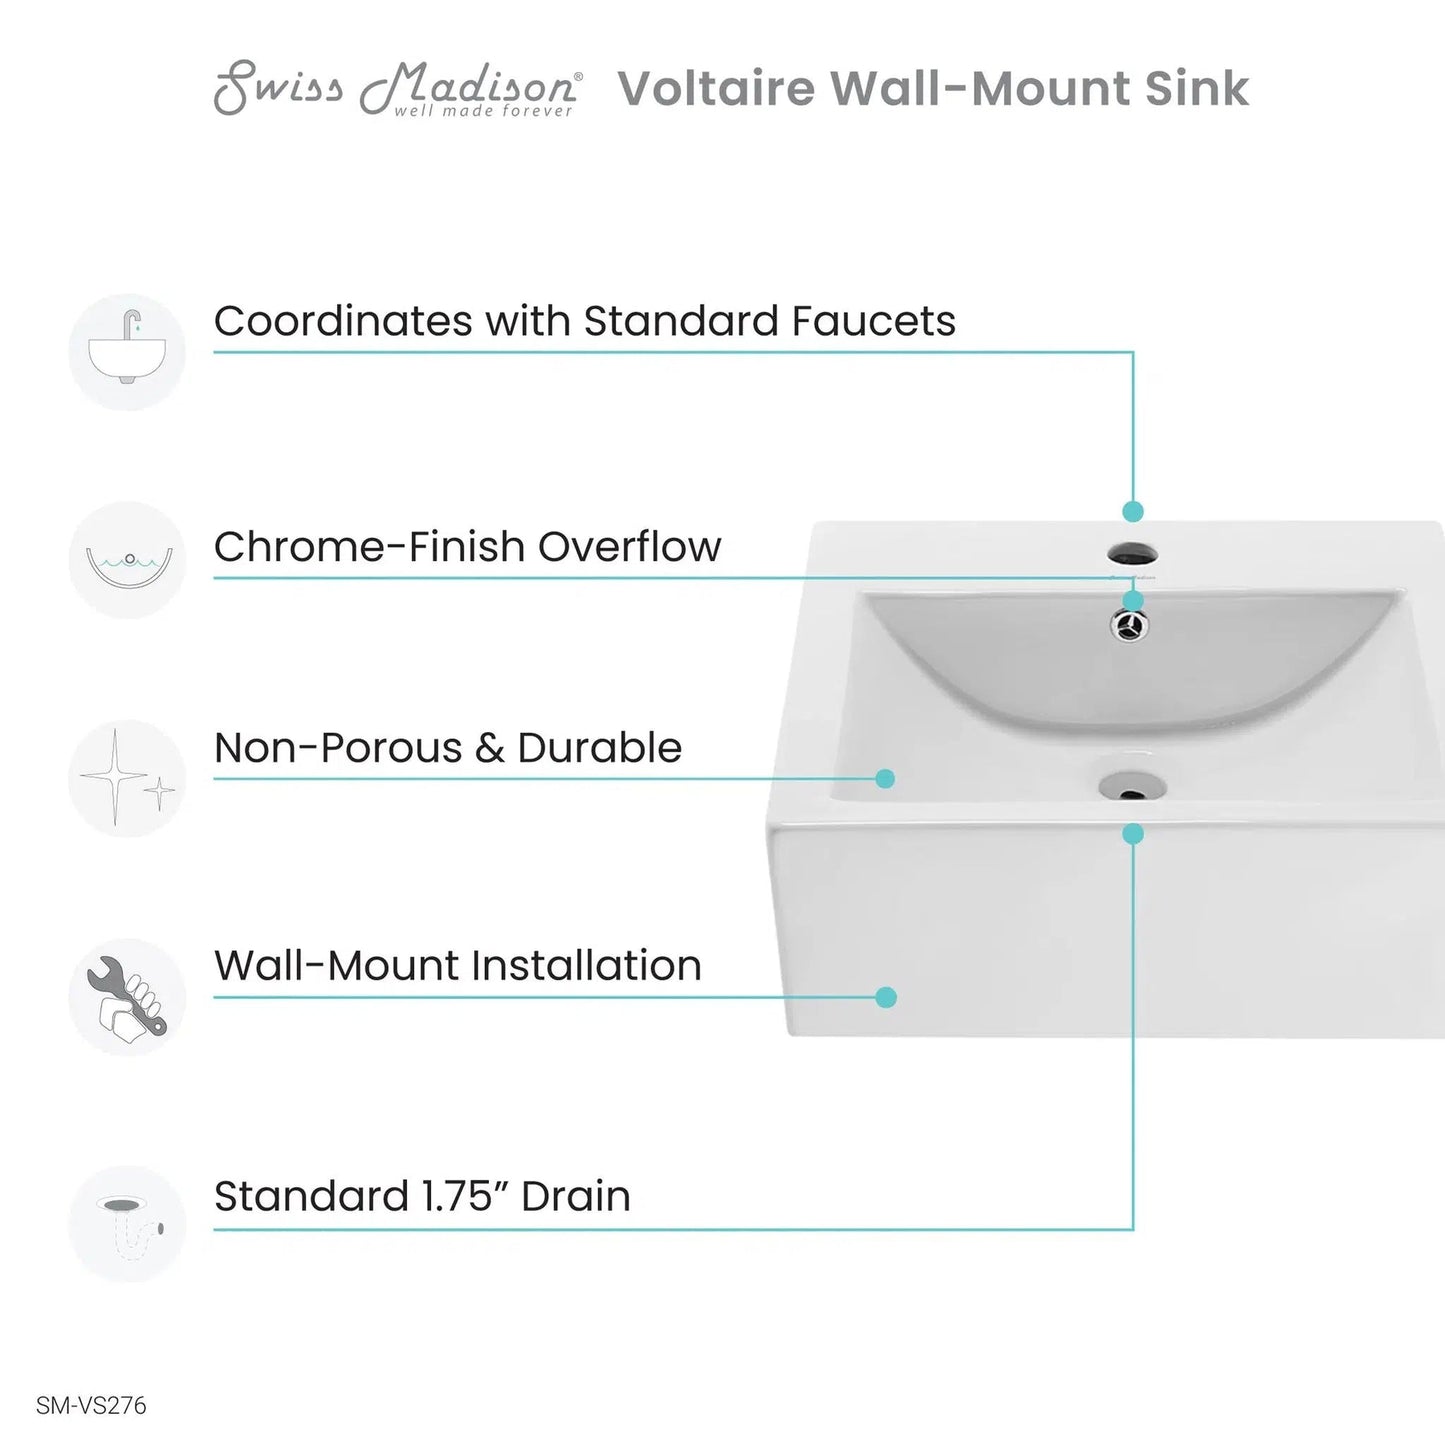 Swiss Madison Voltaire 18" x 18" Wall-Mounted Square White Ceramic Bathroom Sink